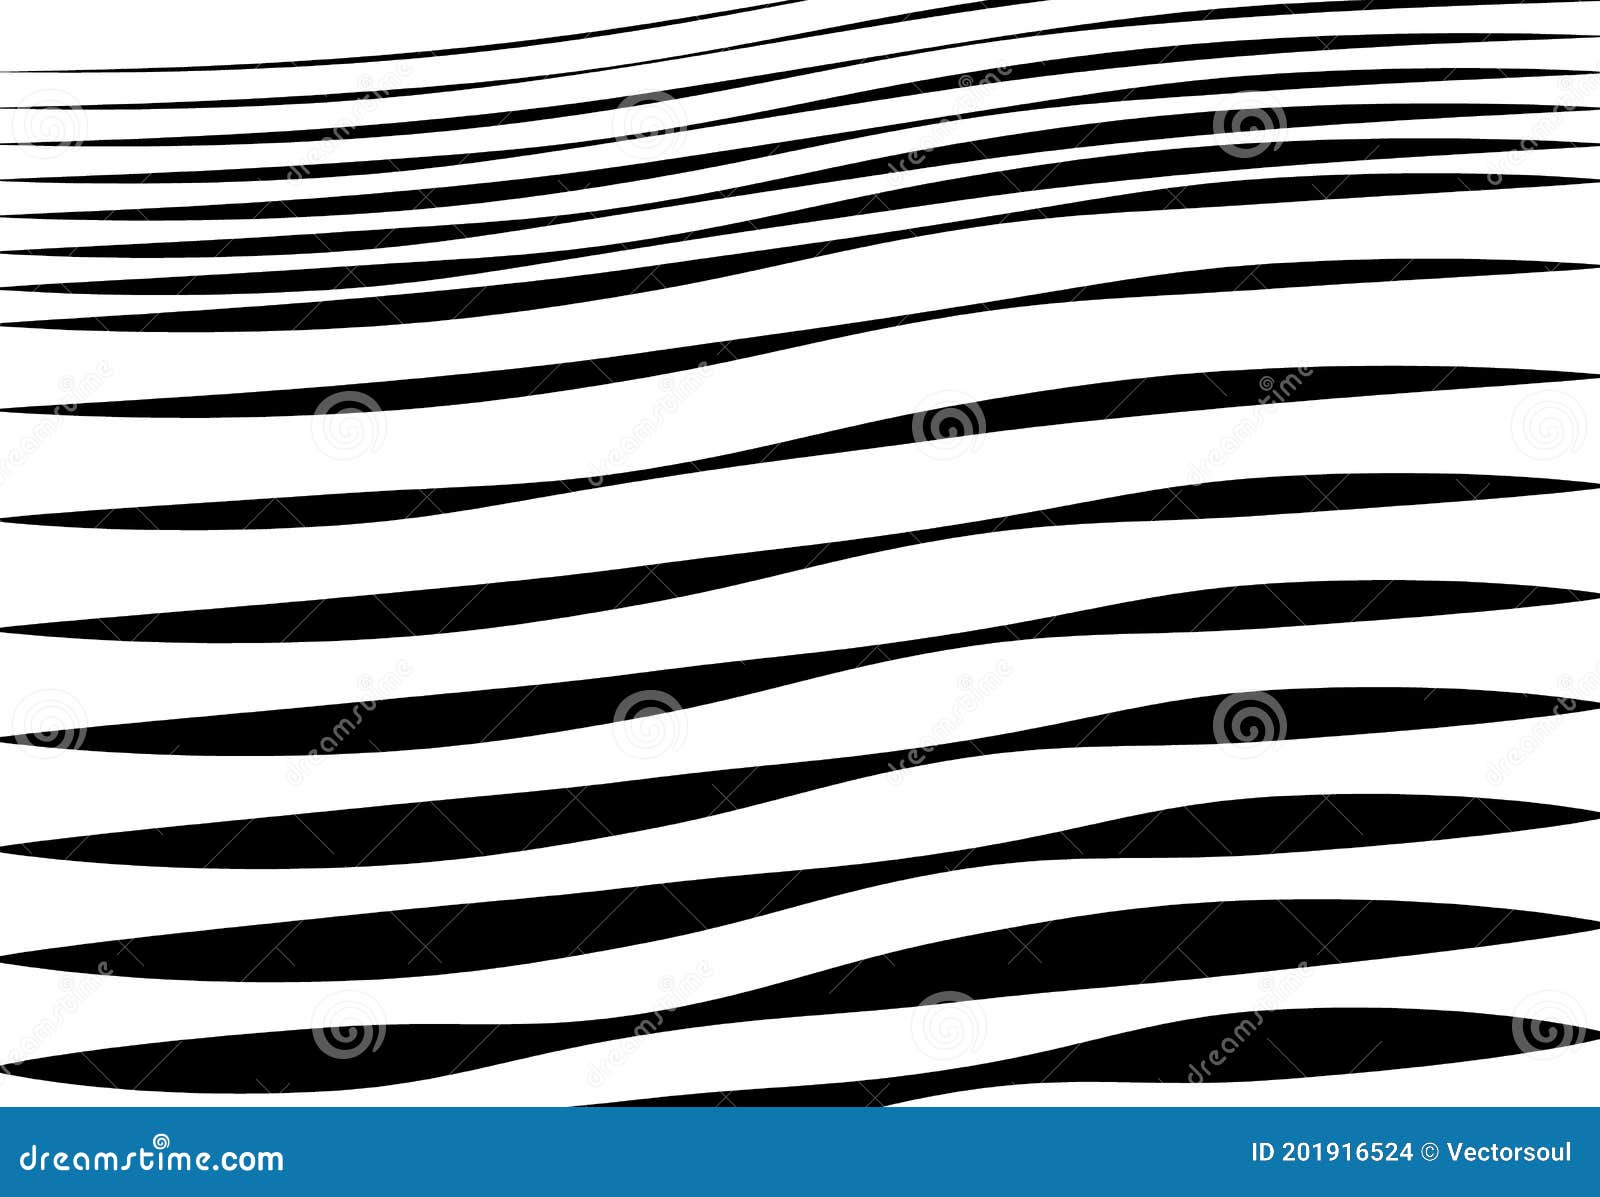 Abstract Wavy, Waving, Billowy and Undulating Lines, Stripes. Squiggly ...